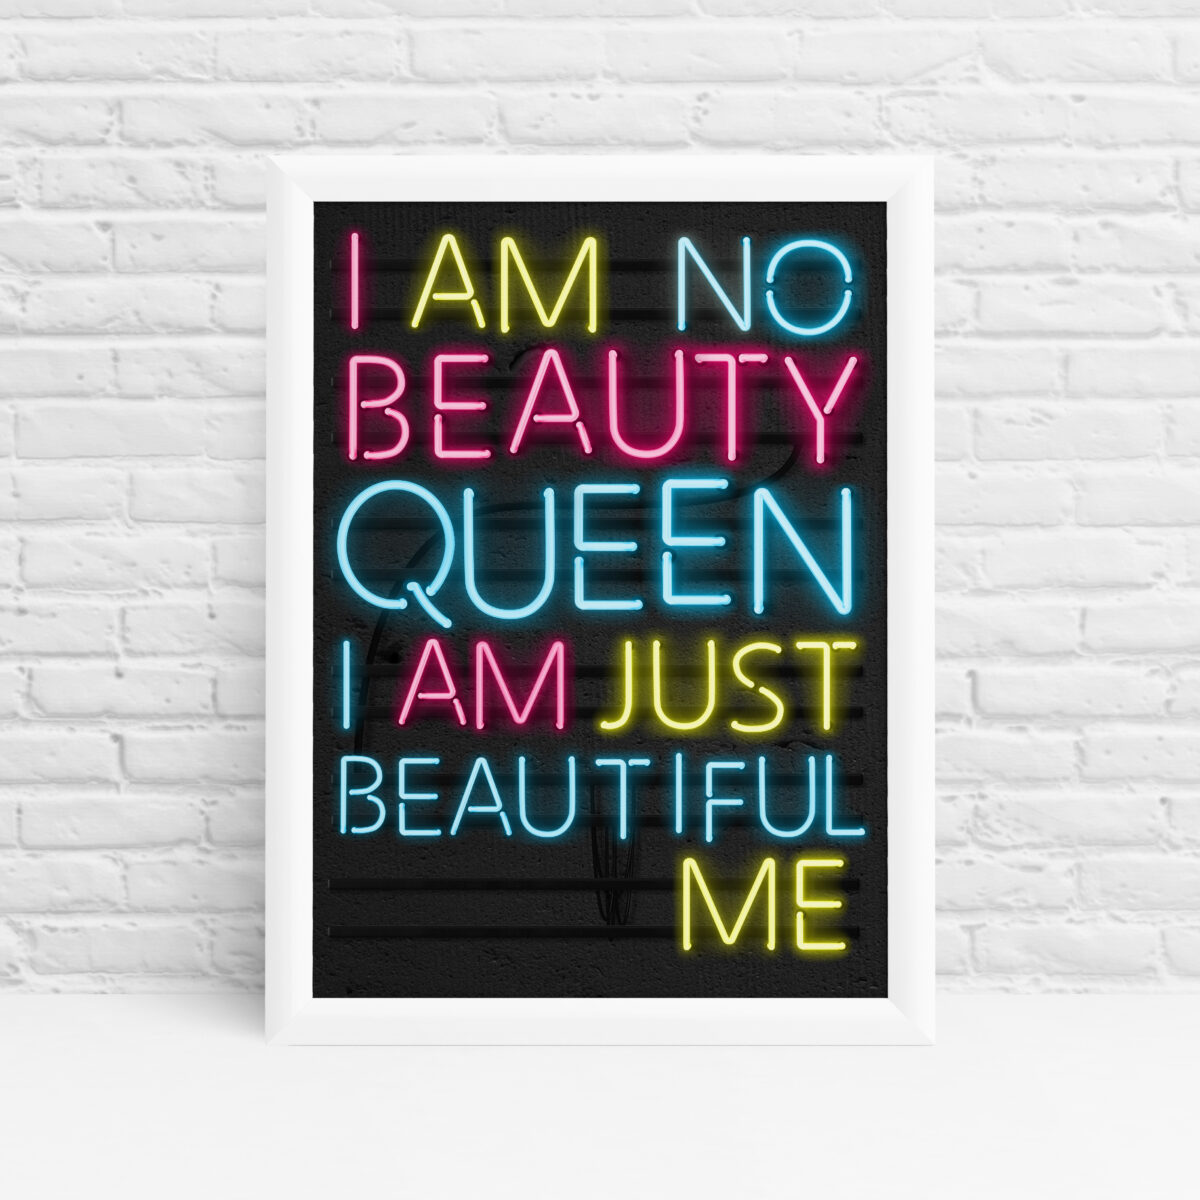 'Just Beautiful Me' inspirational bedroom print wall art by Ibbleobble